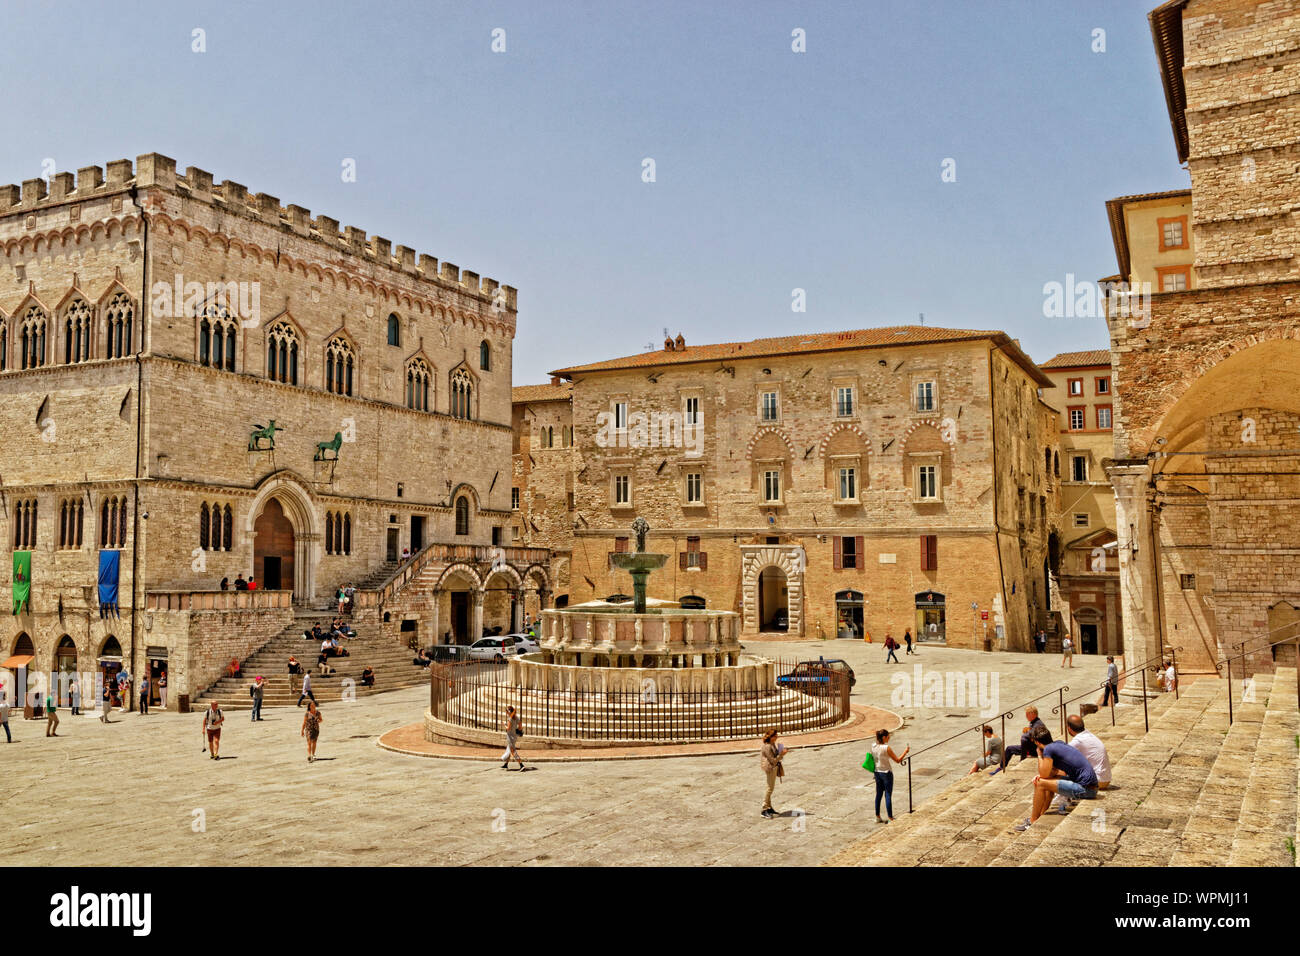 The Fontana Maggiore and the National Gallery of Umbriain the Piazza IV Novembre at Perugia in Umbria Province, Italy. Stock Photo